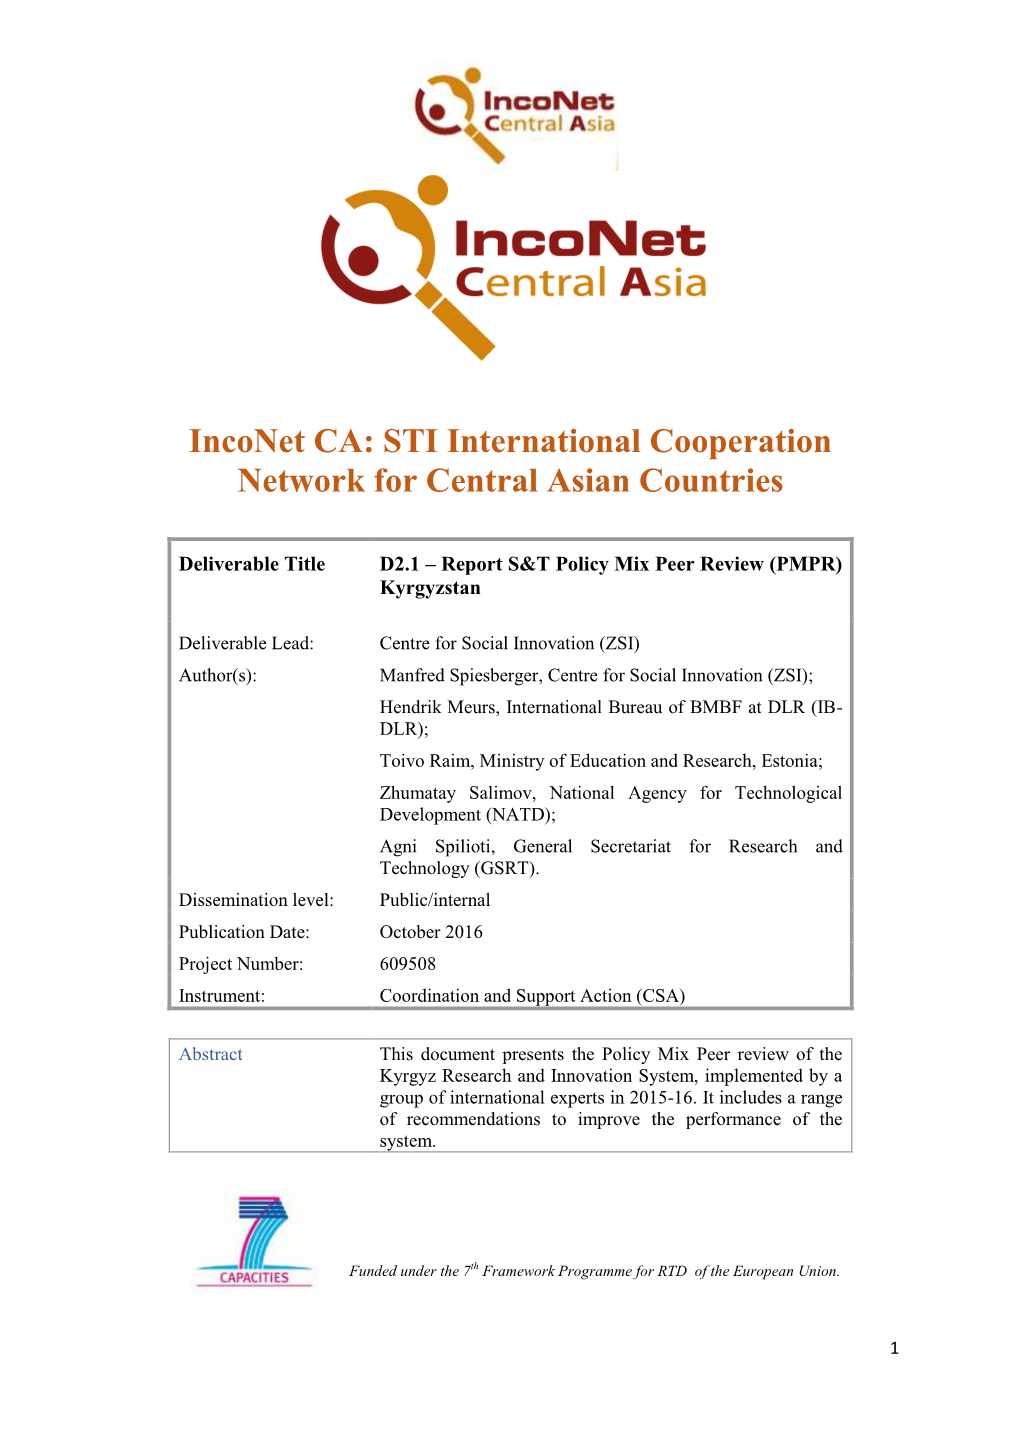 Inconet CA: STI International Cooperation Network for Central Asian Countries